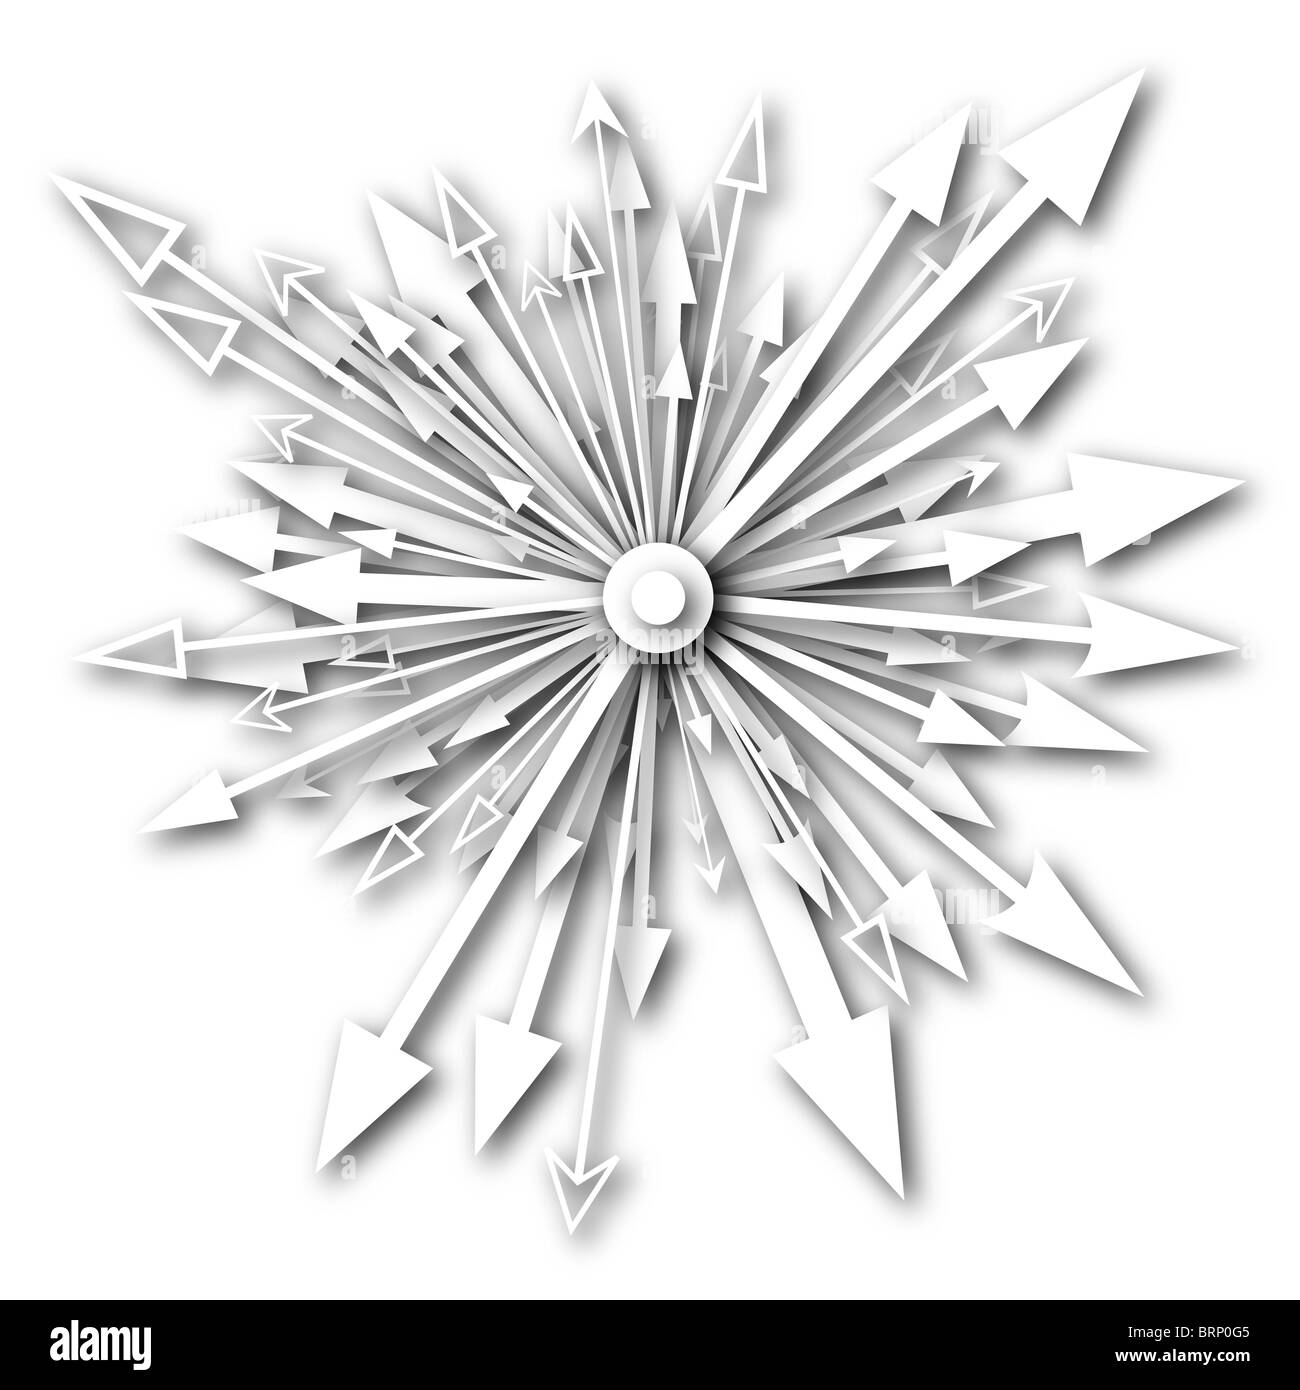 Abstract design element of white arrows and shadows Stock Photo